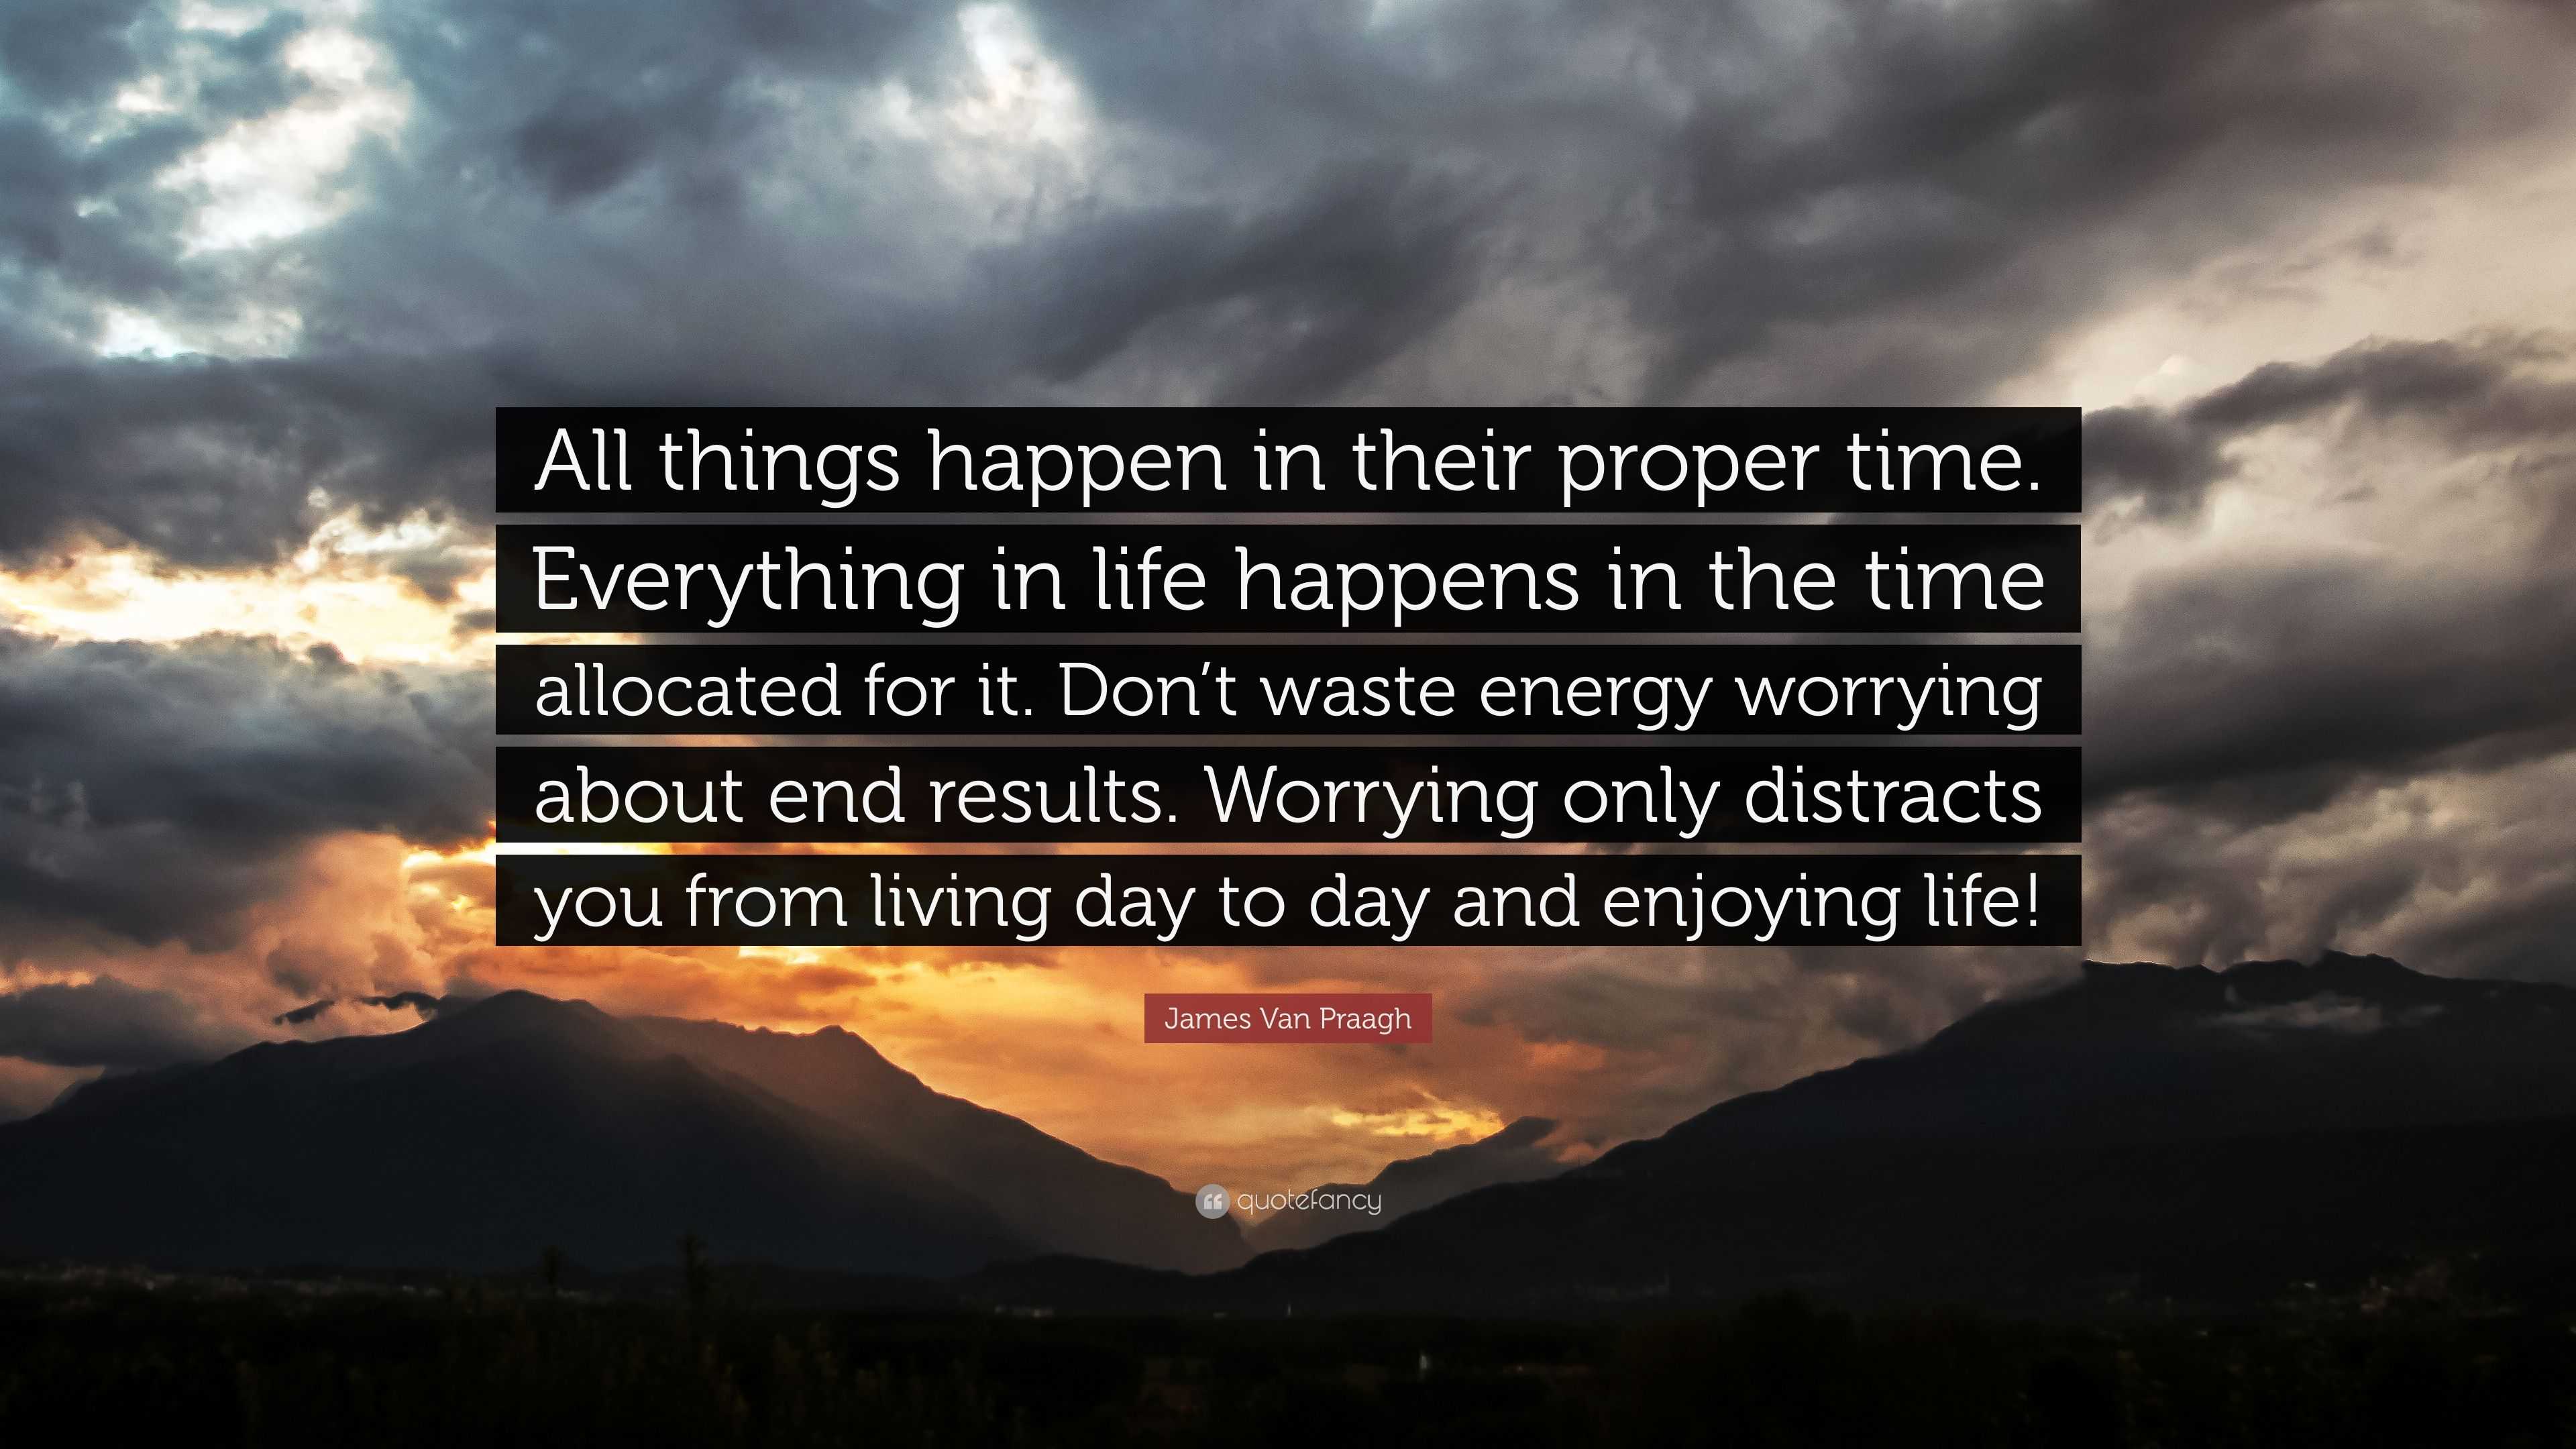 James Van Praagh Quote: “All things happen in proper time. Everything in life happens in the time allocated for it. Don't waste worr...”